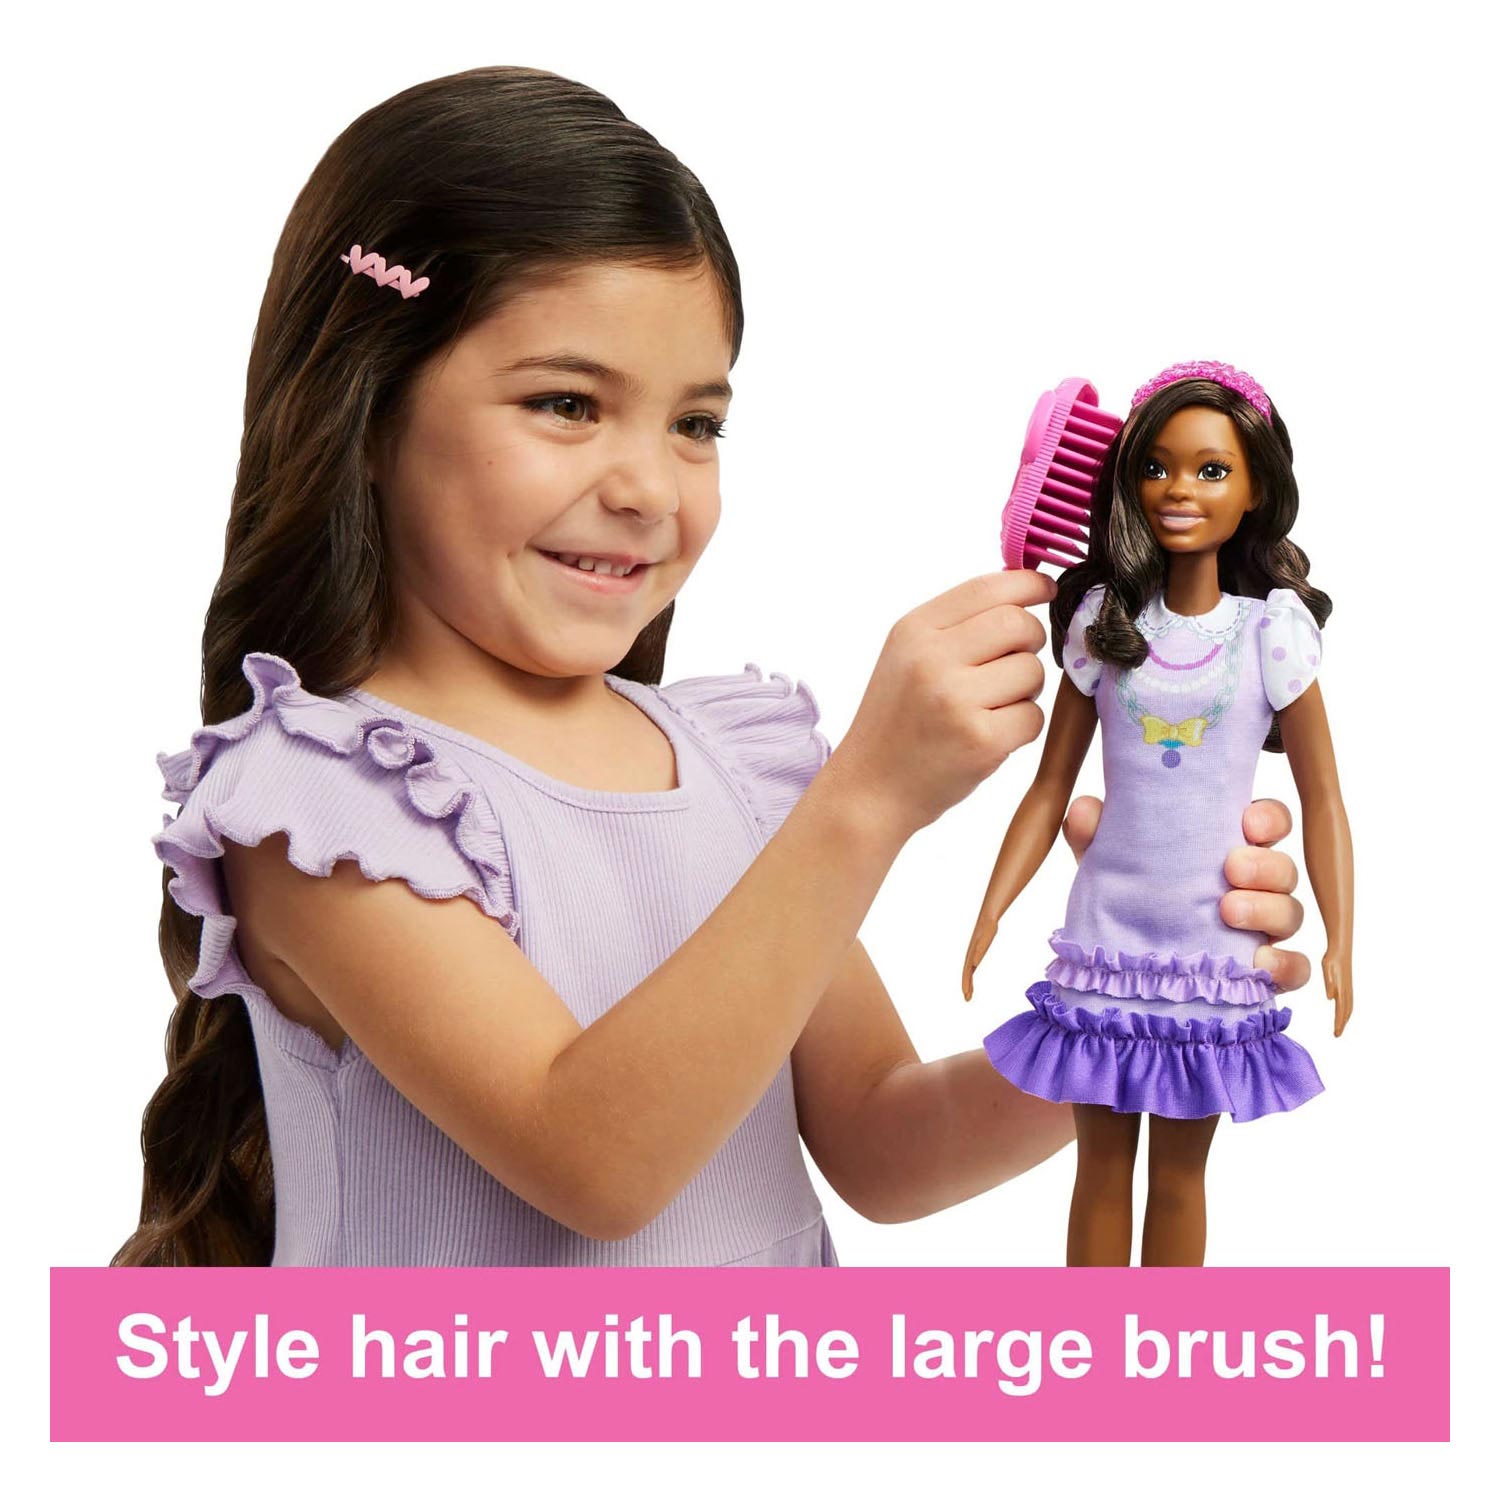 My First Barbie - Soft Touch Pop met Poedel